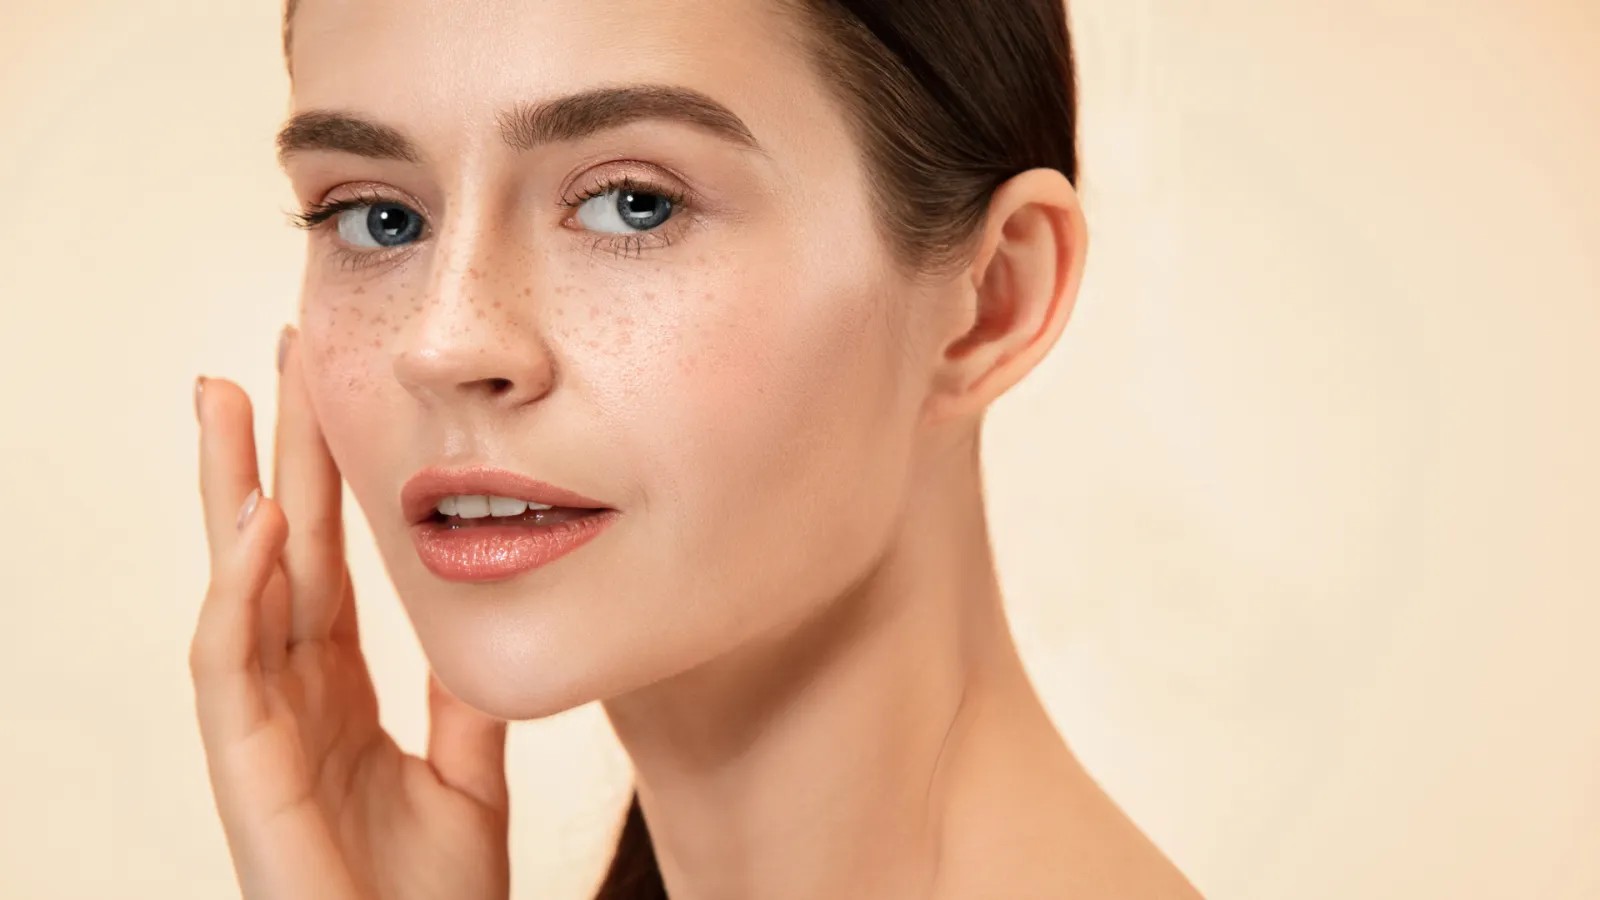 6 tips for clearer skin